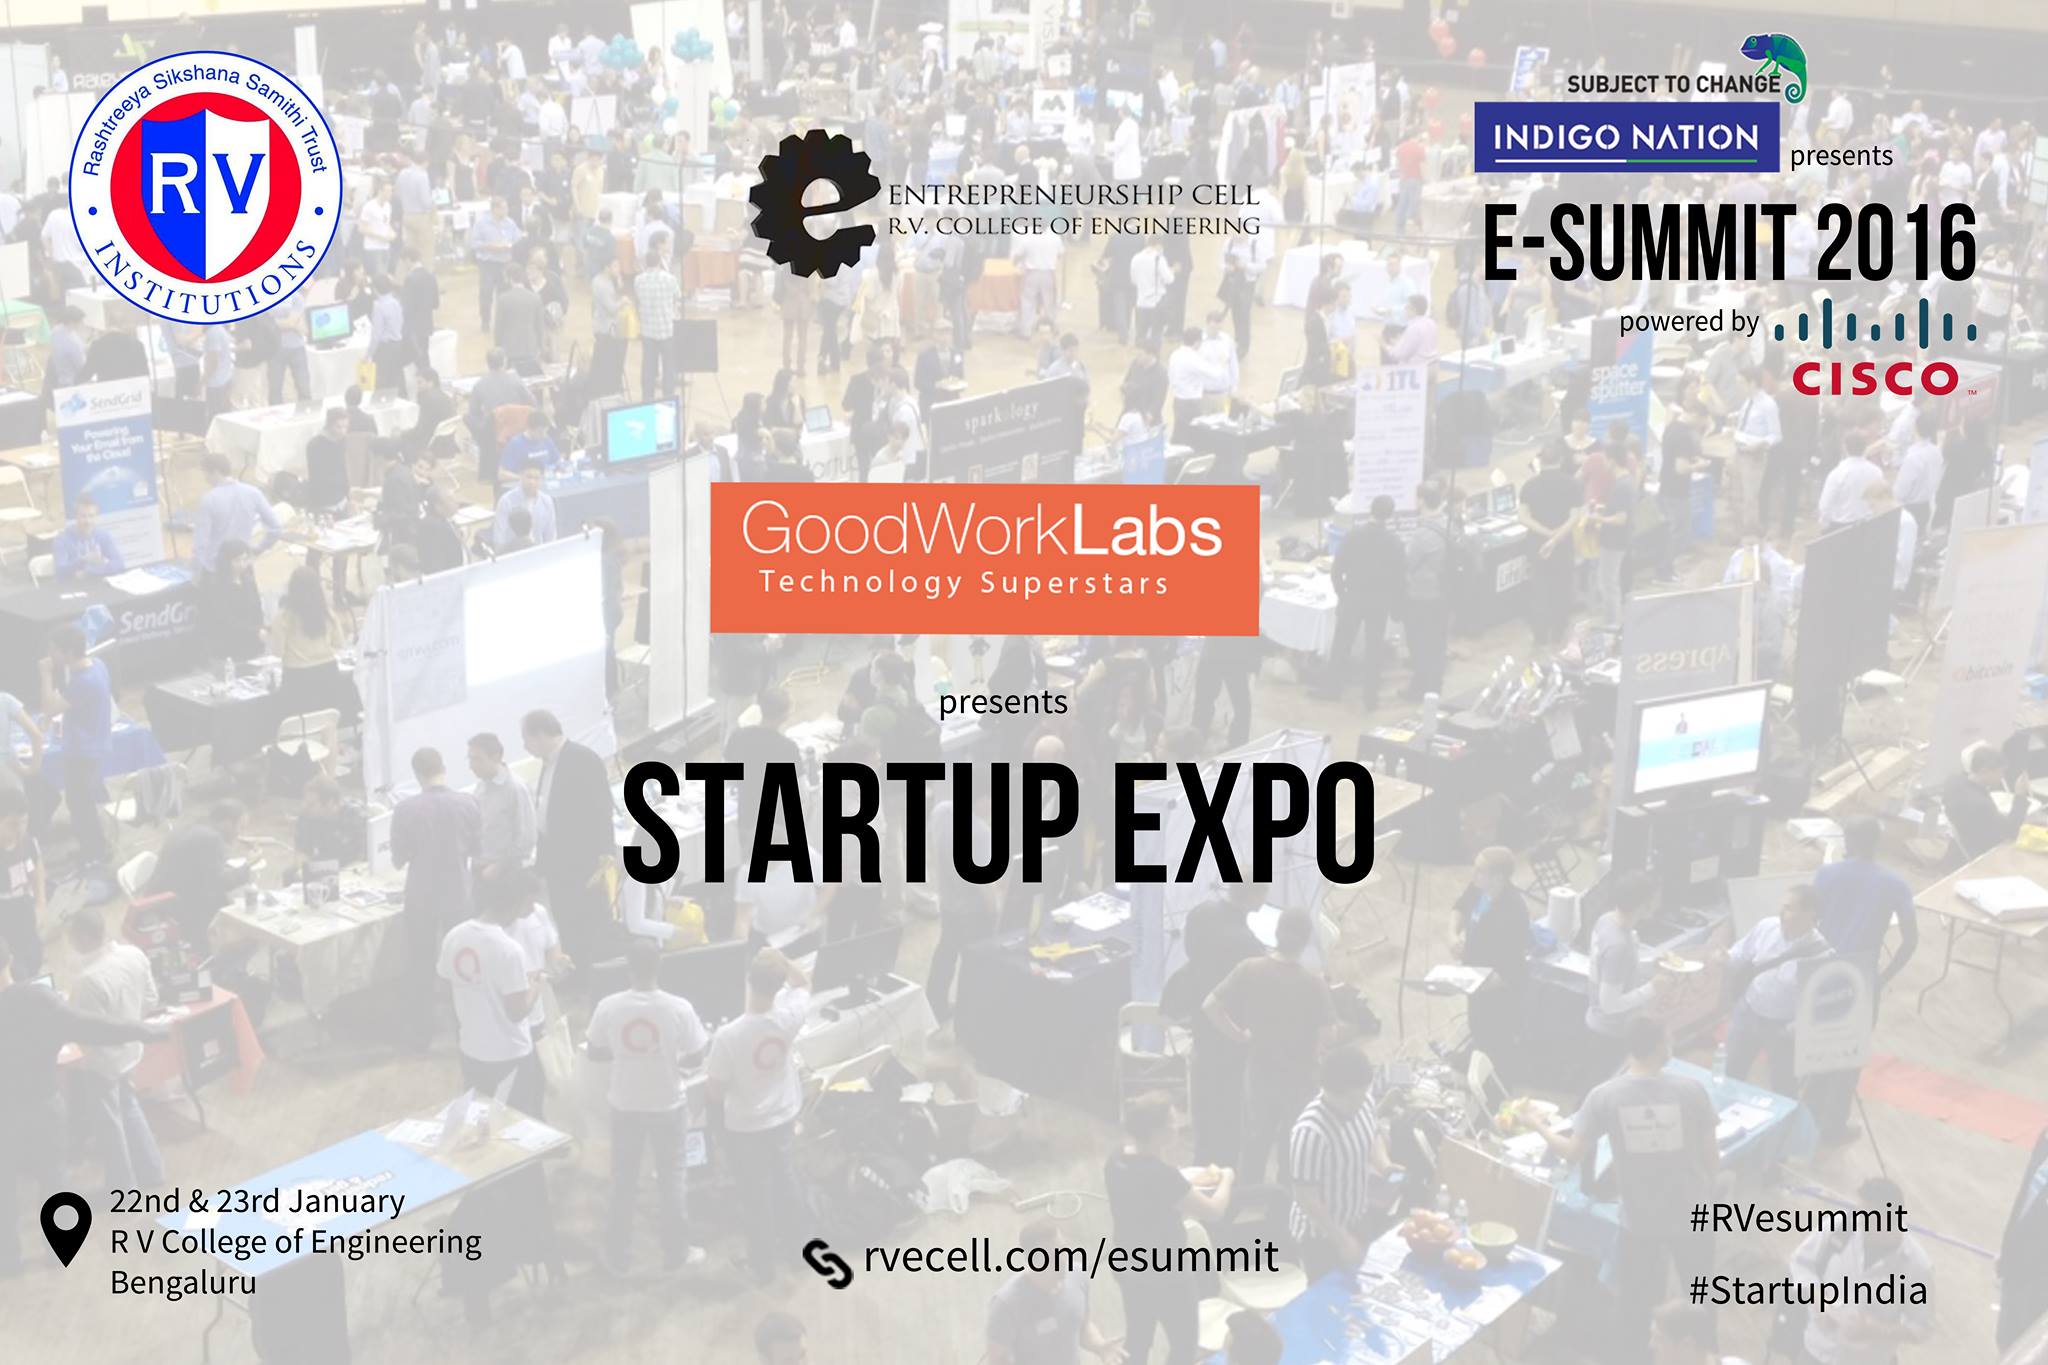 goodworklabs-title-sponsor-startup-expo-rvce-2016